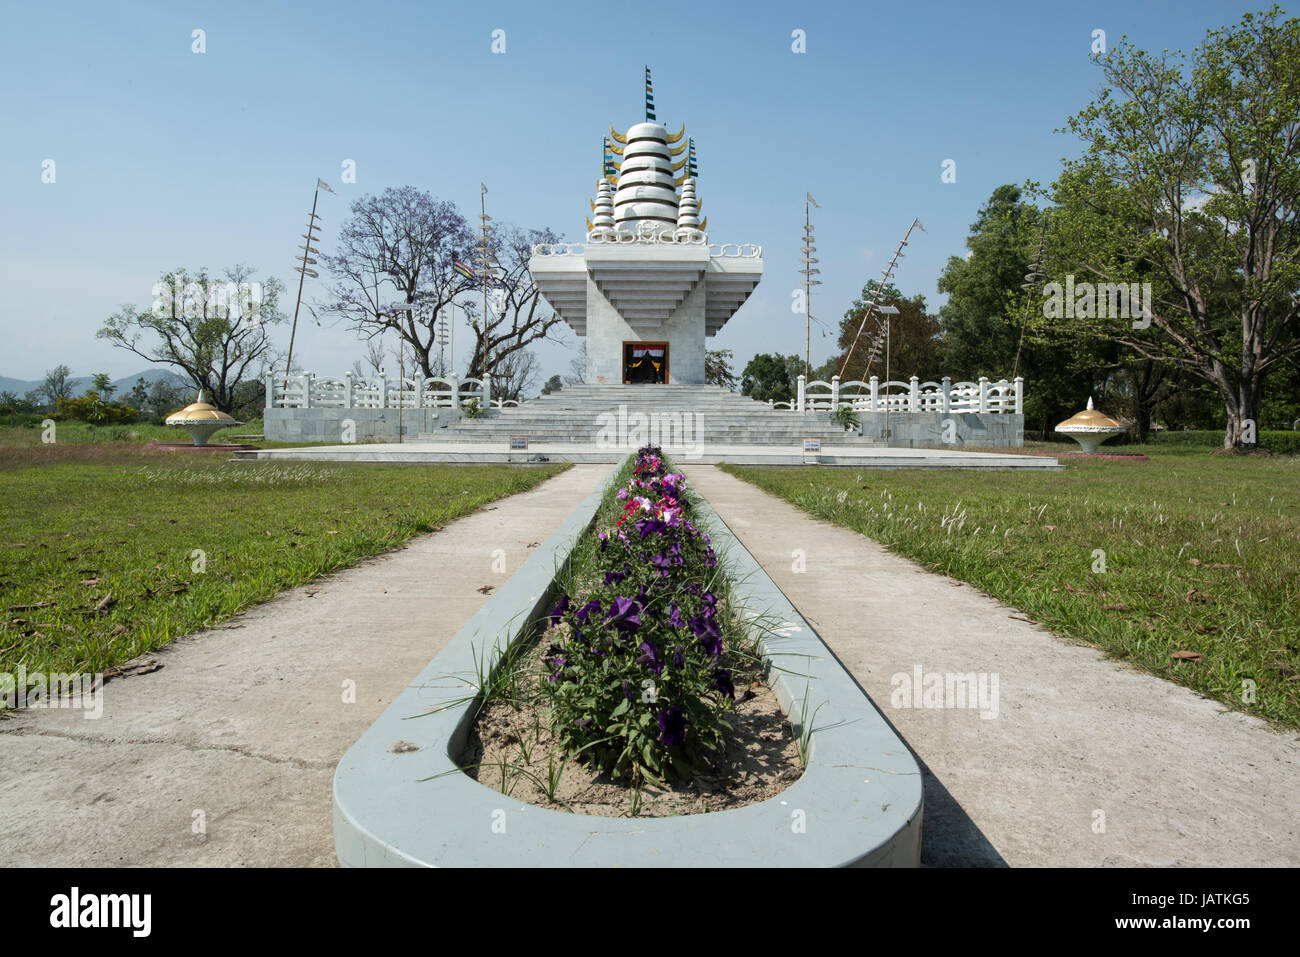 Lord Iputhou Nongda Leireng Pakhangba Temple in the grounds of Kangla Fort, Imphal, Manipur, India Stock Photo